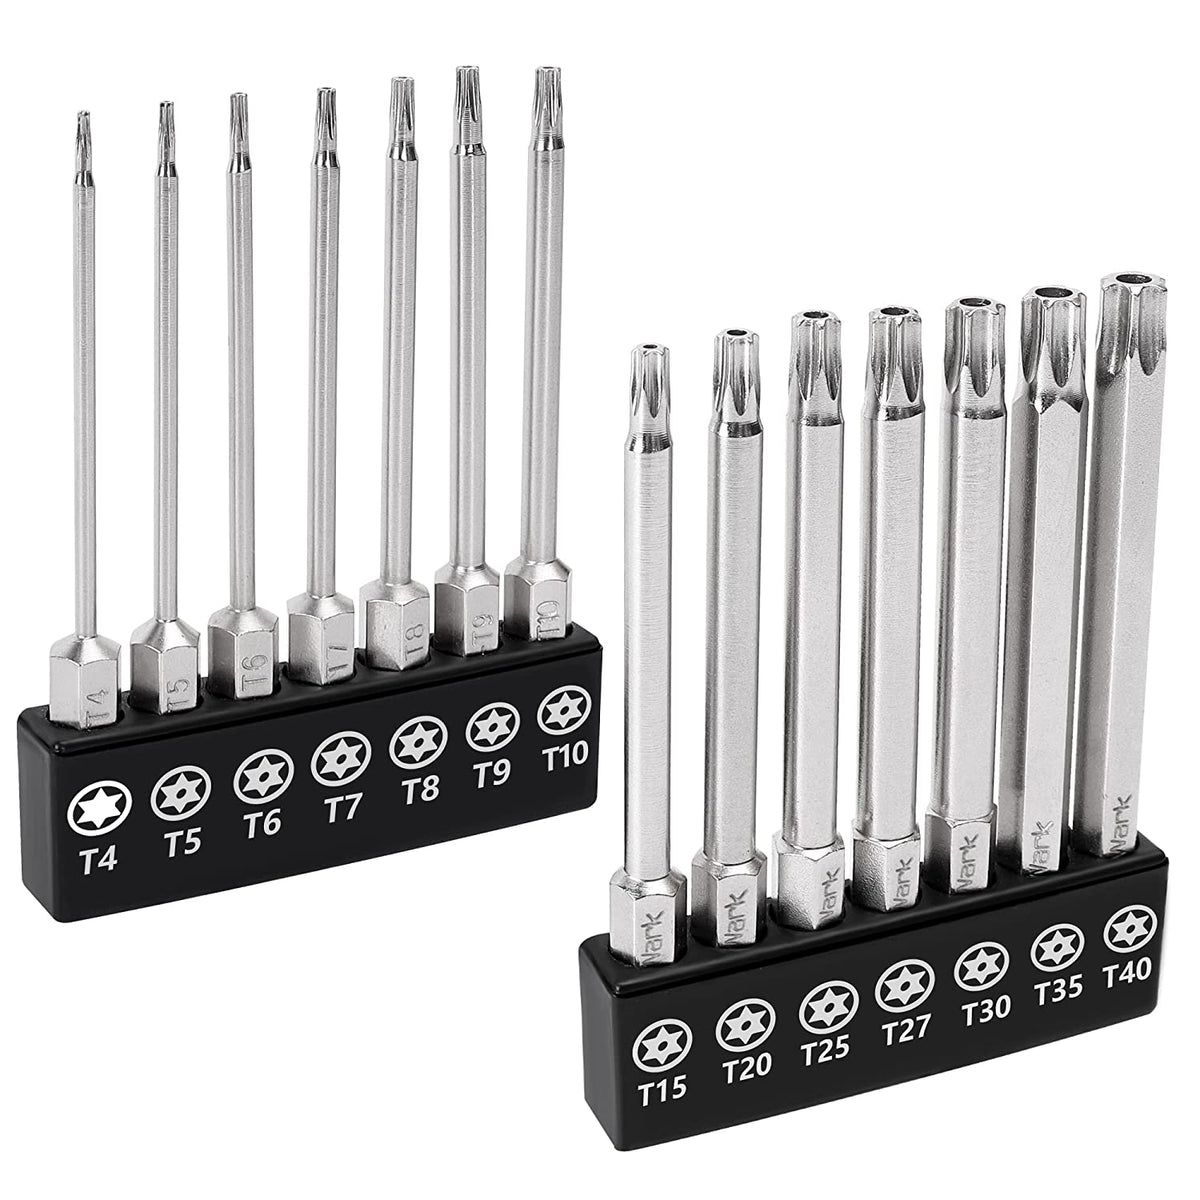 MulWark Allen Wrench Drill Bits Metric and SAE, 3 Long Magnetic Torx Bit  Set, 33 Piece